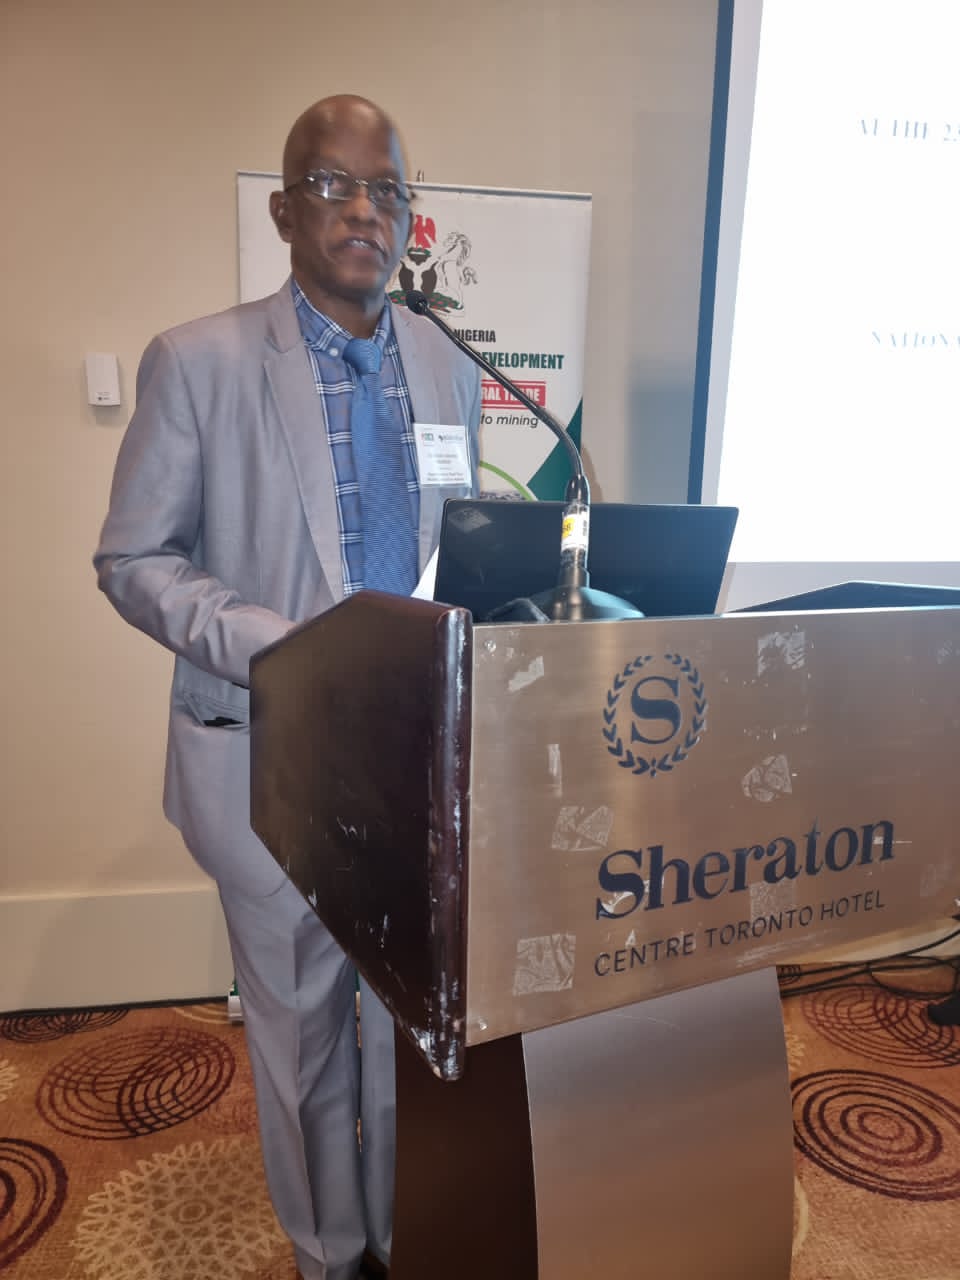 Nigeria has huge investment opportunities for primary steel production - Dr Hassan